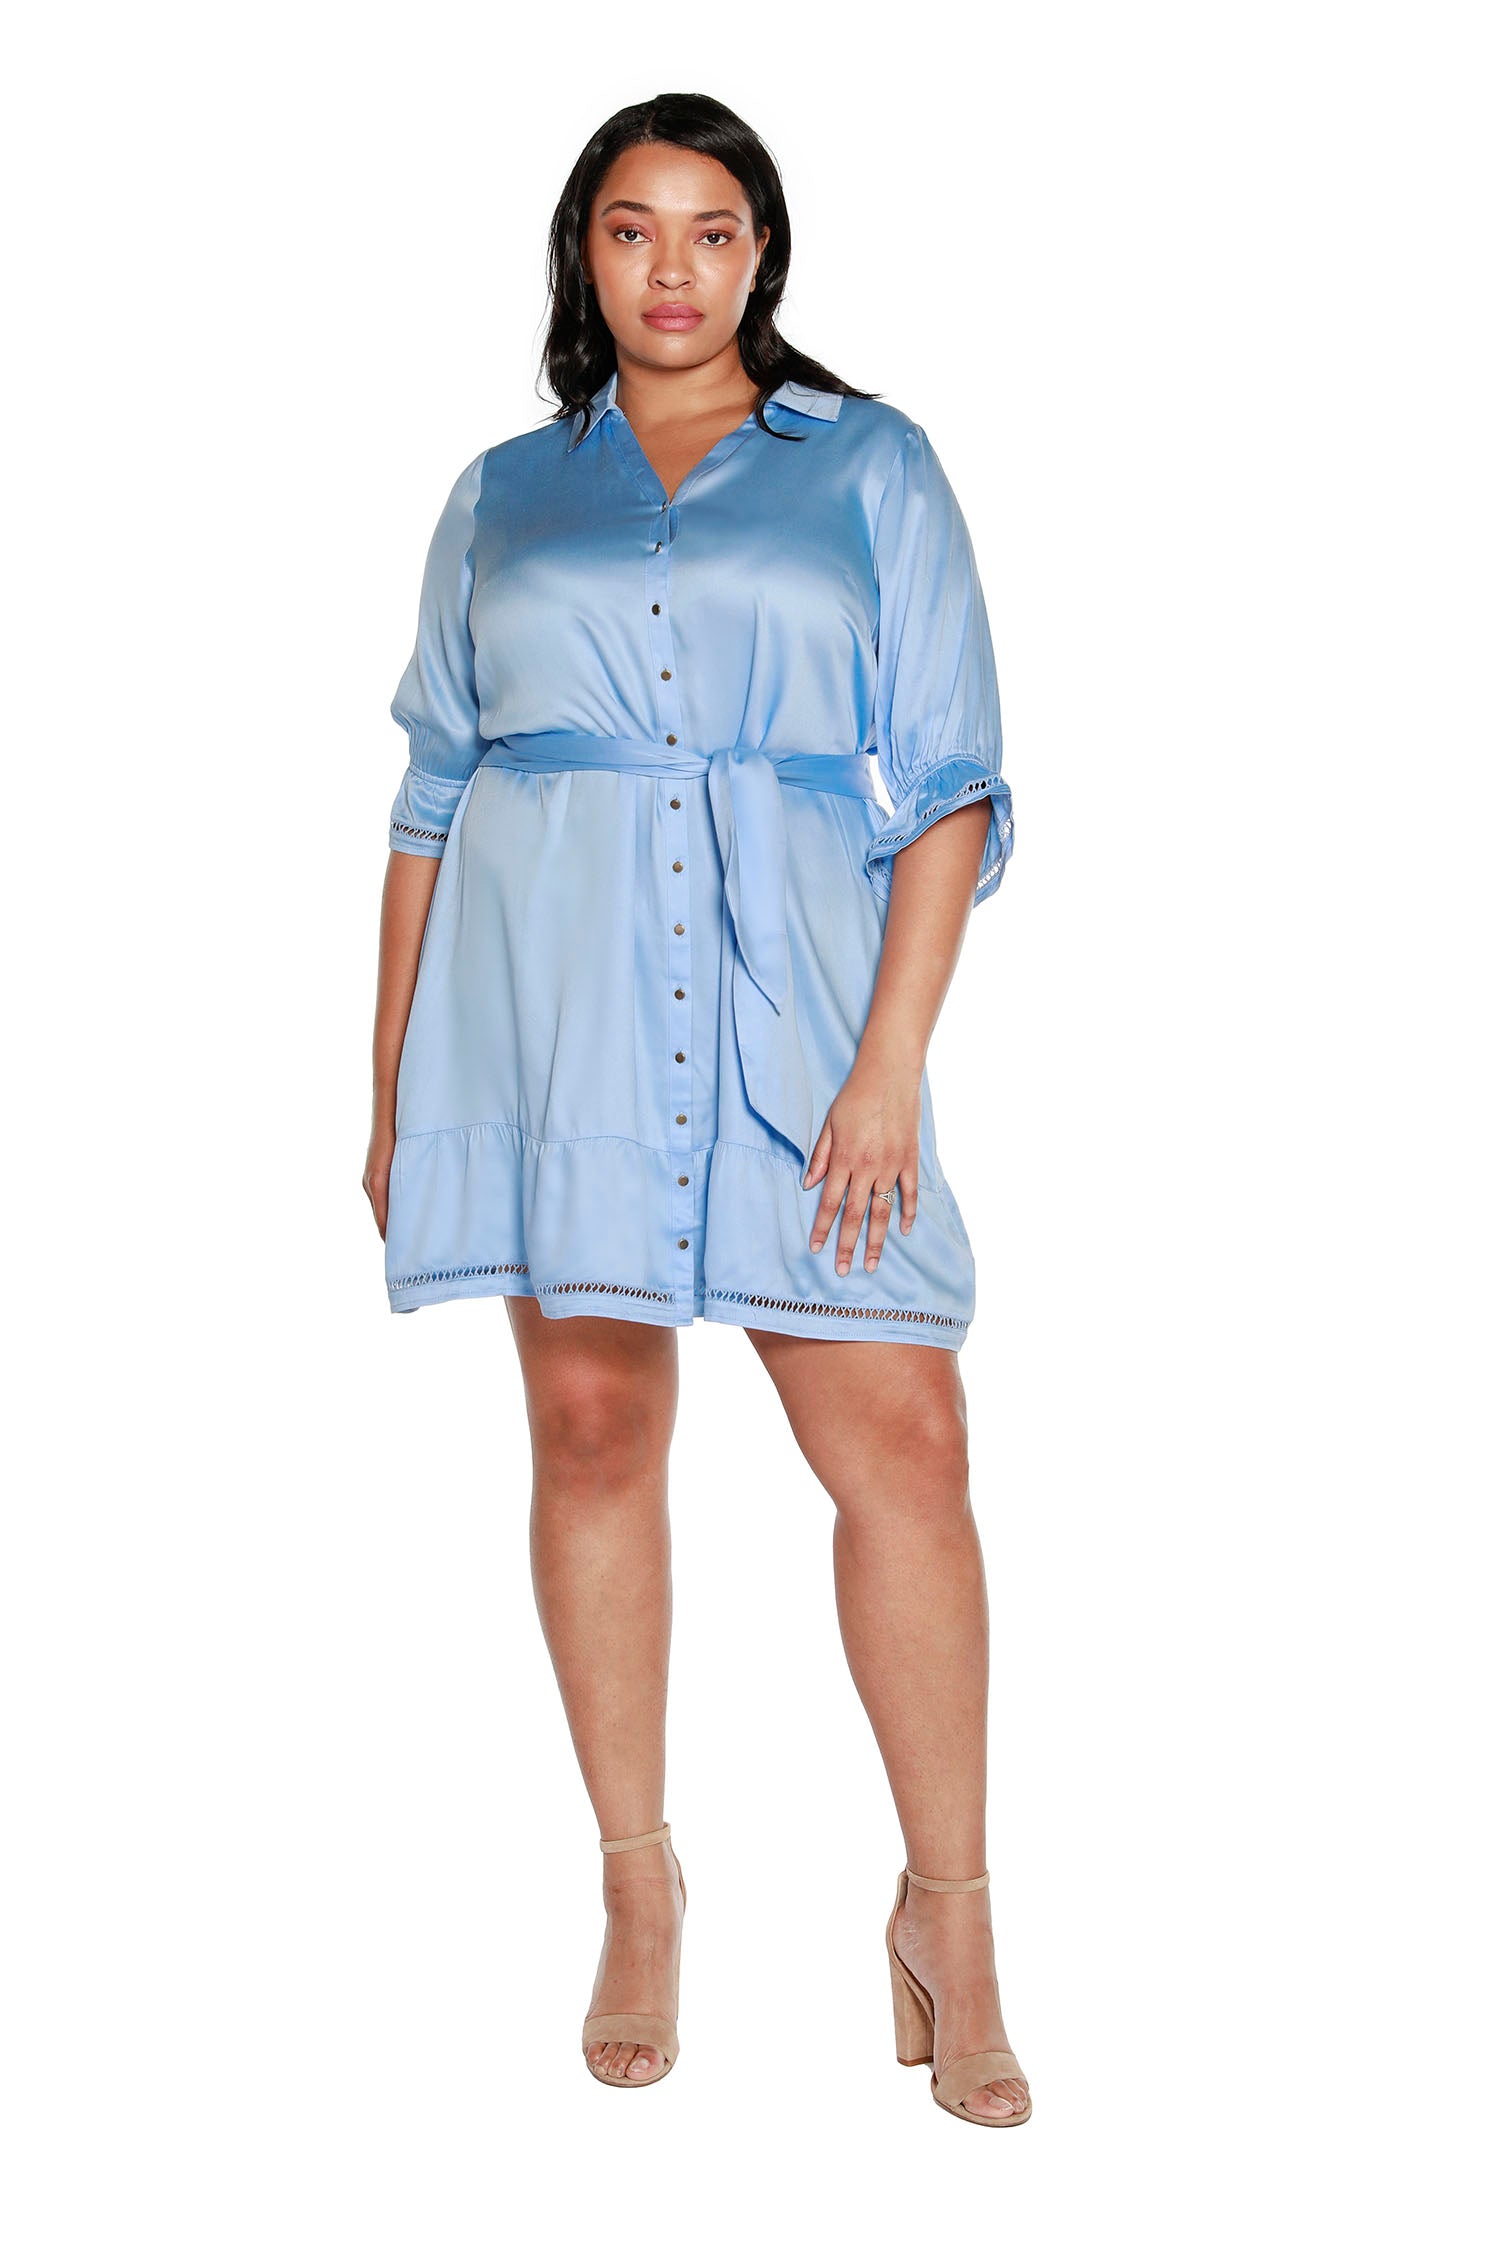 Women's Silky Rayon Button-Up Shirtdress with Ruffled Sleeves | Curvy